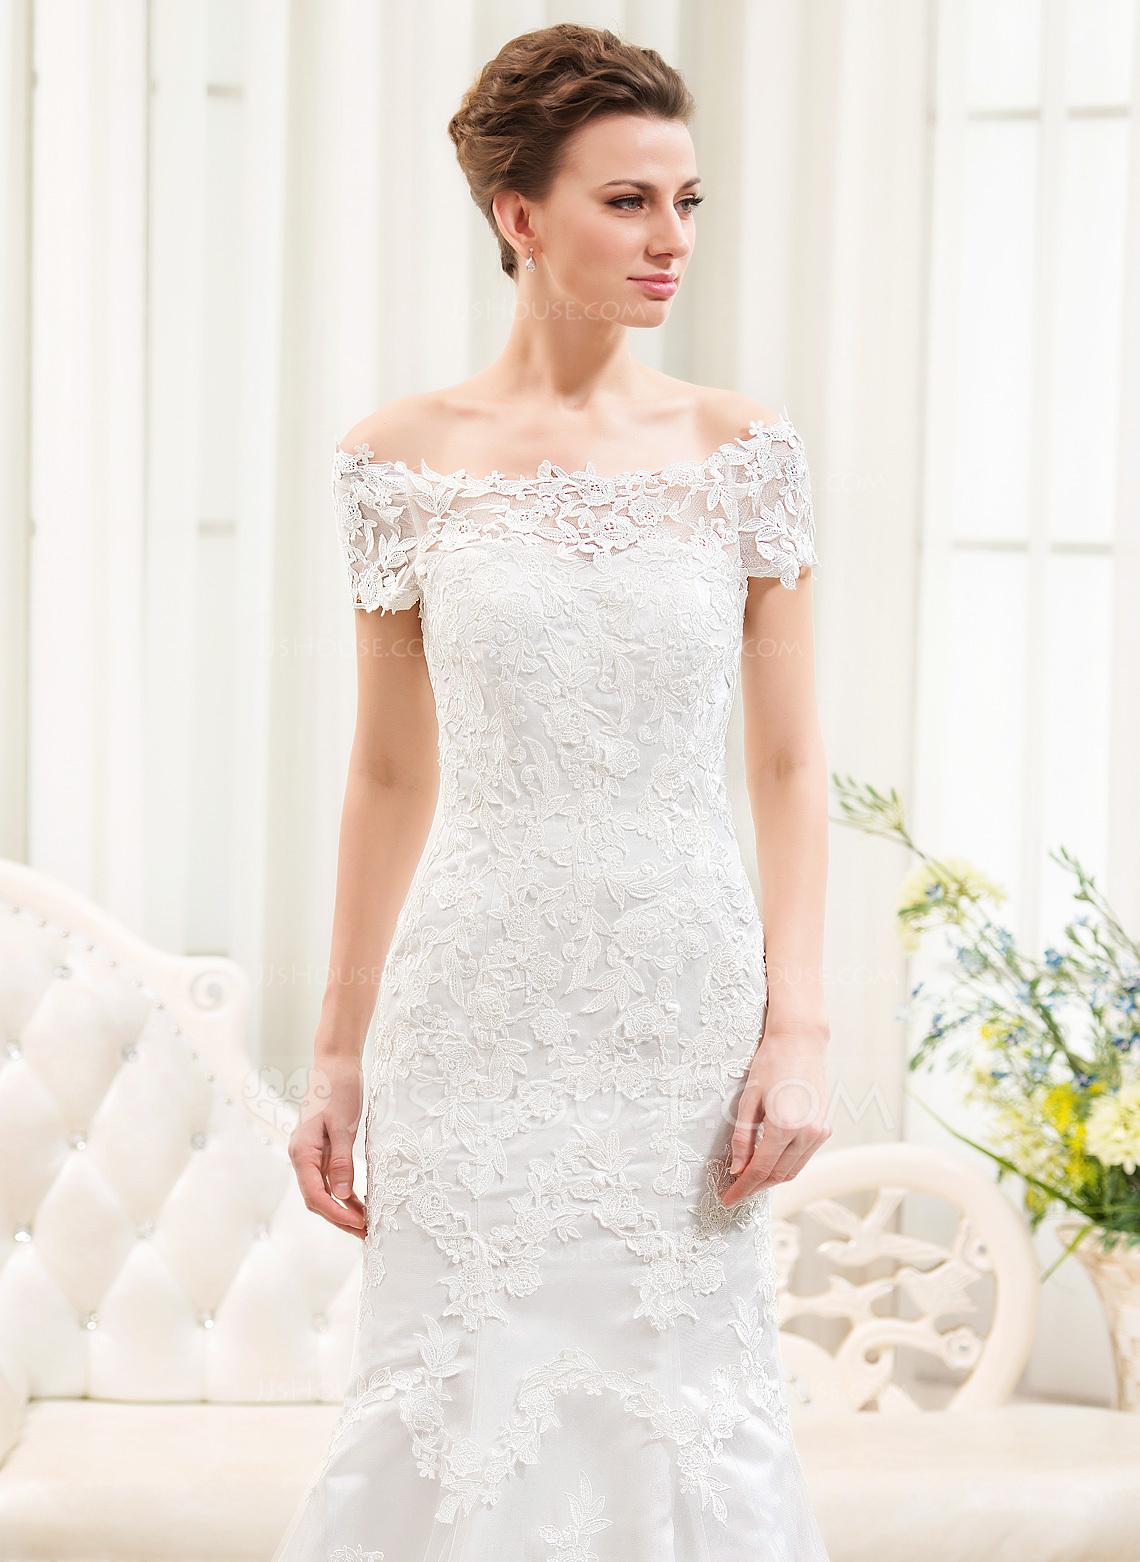 Top Jjs House Wedding Dresses of the decade The ultimate guide 